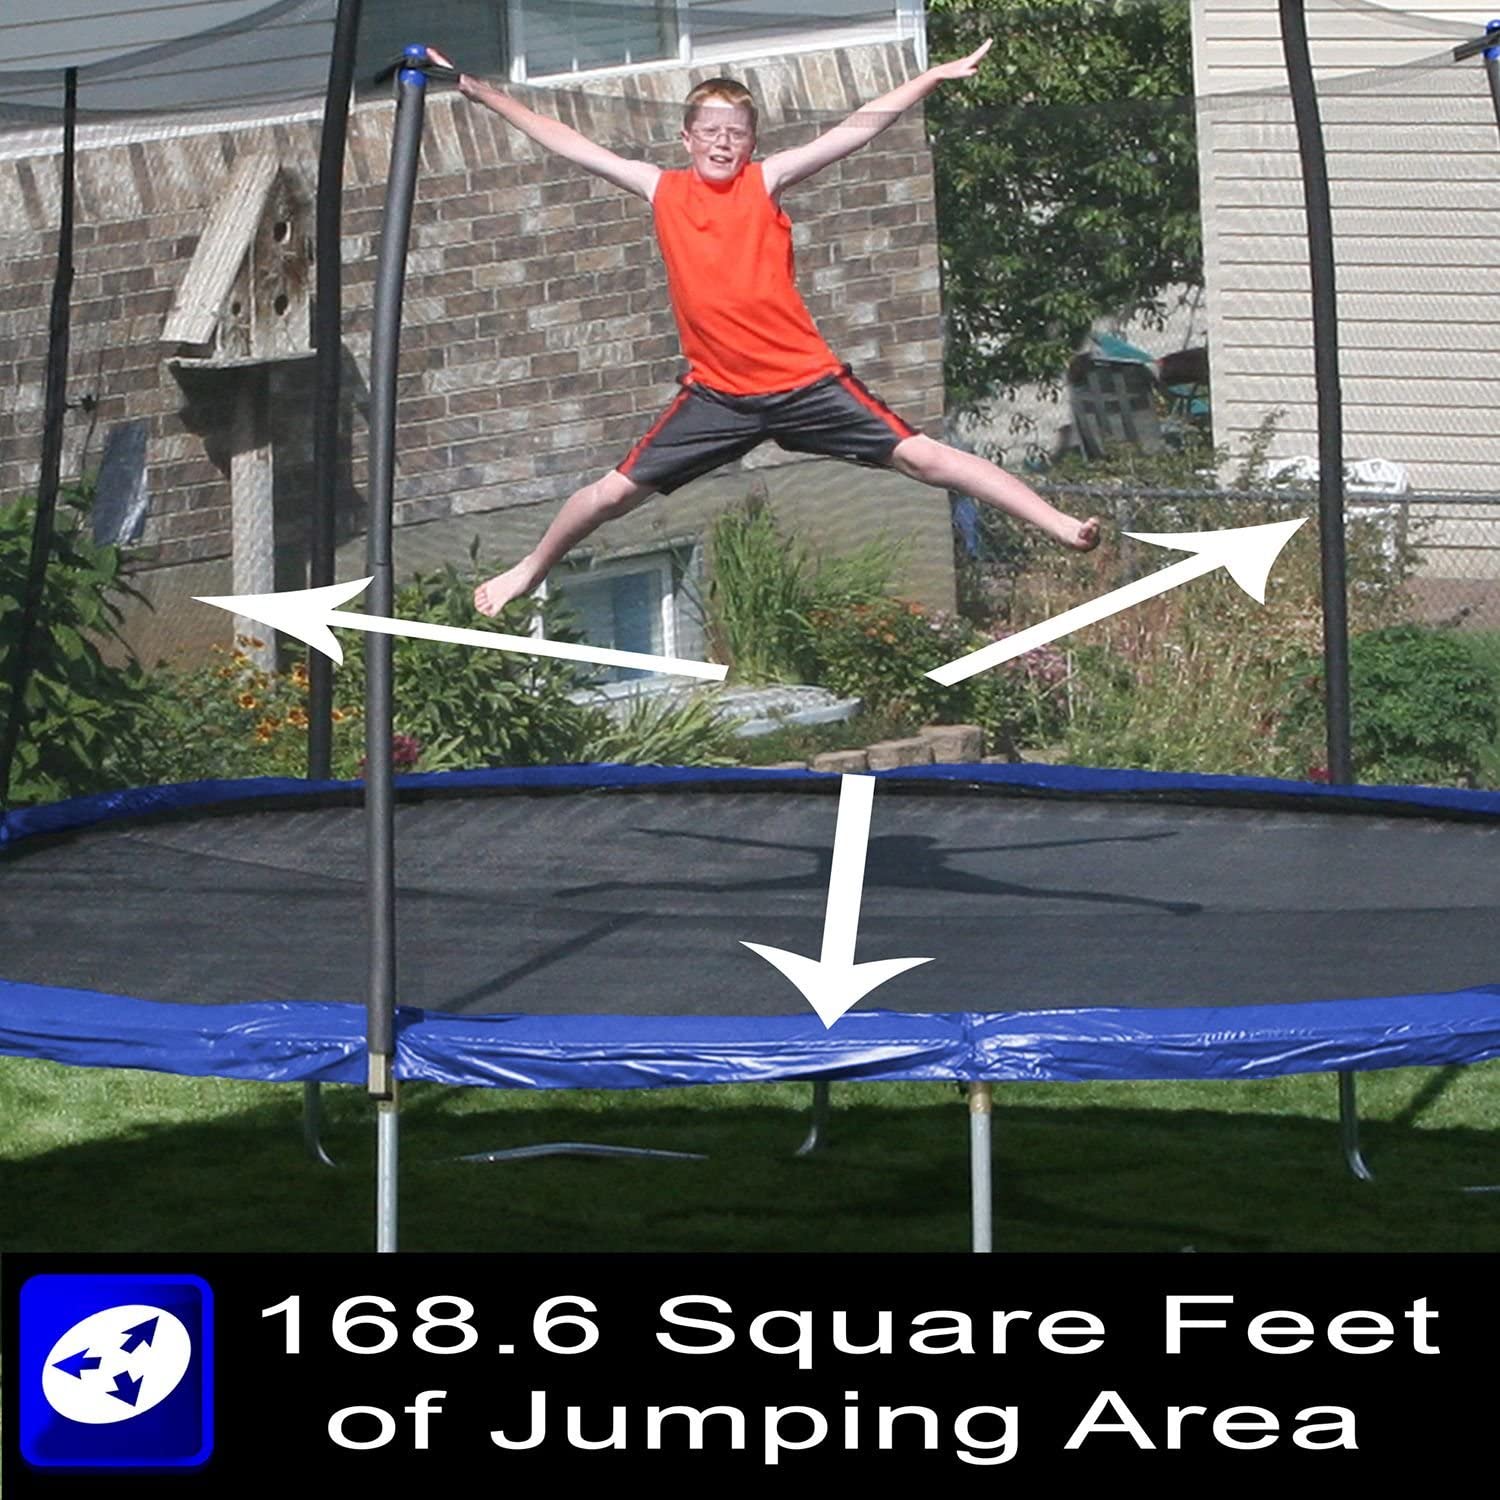 skywalker trampoline parts reviews rectangle square oval